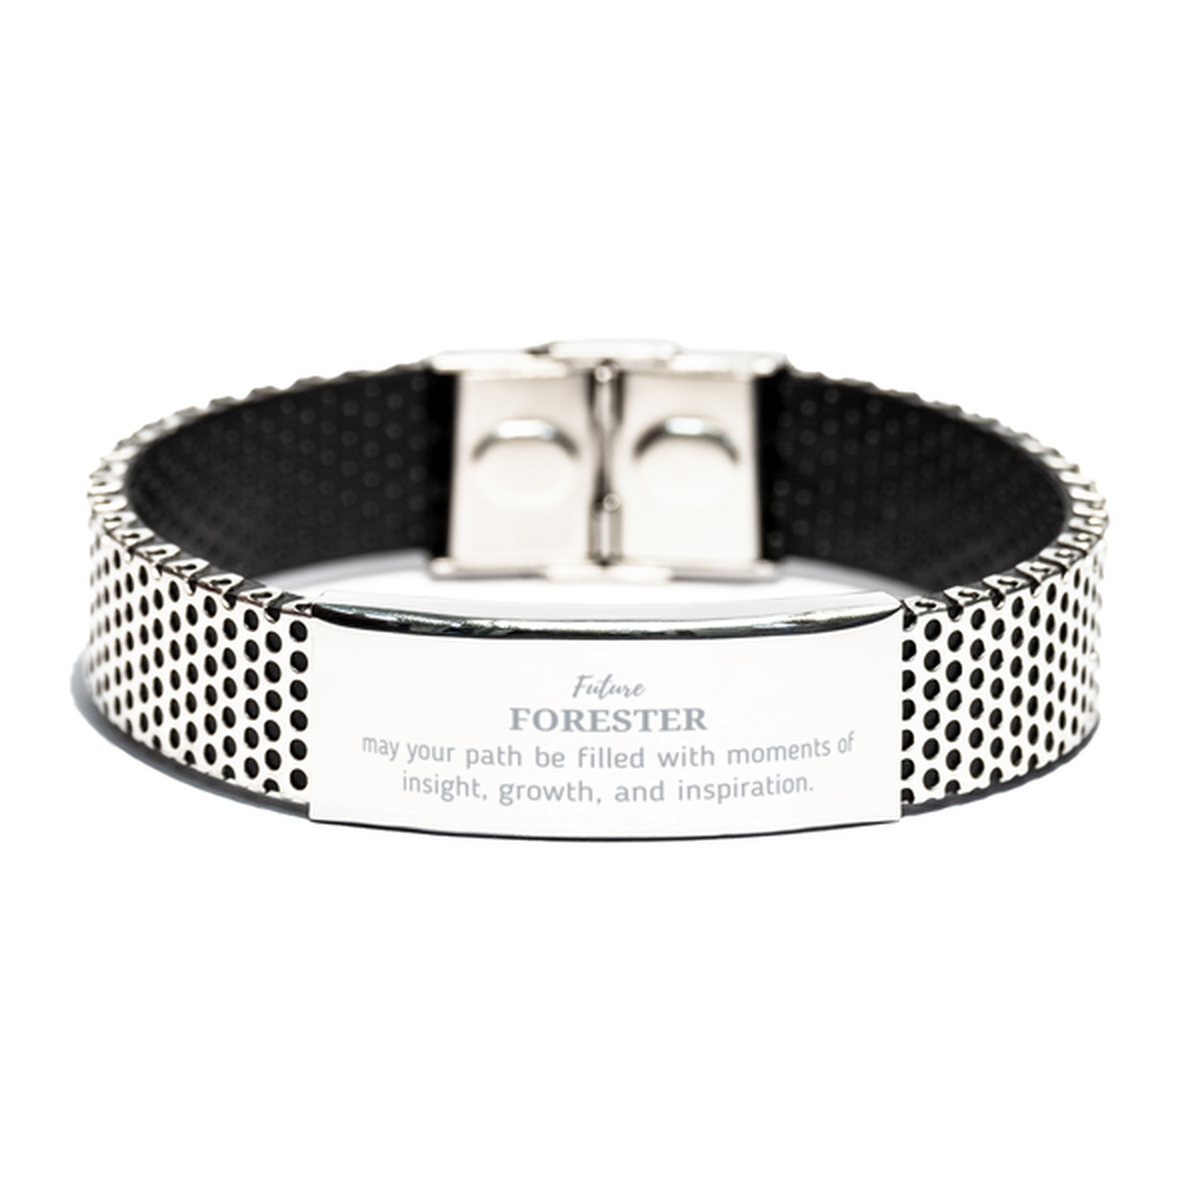 Future Forester Gifts, May your path be filled with moments of insight, Graduation Gifts for New Forester, Christmas Unique Stainless Steel Bracelet For Men, Women, Friends